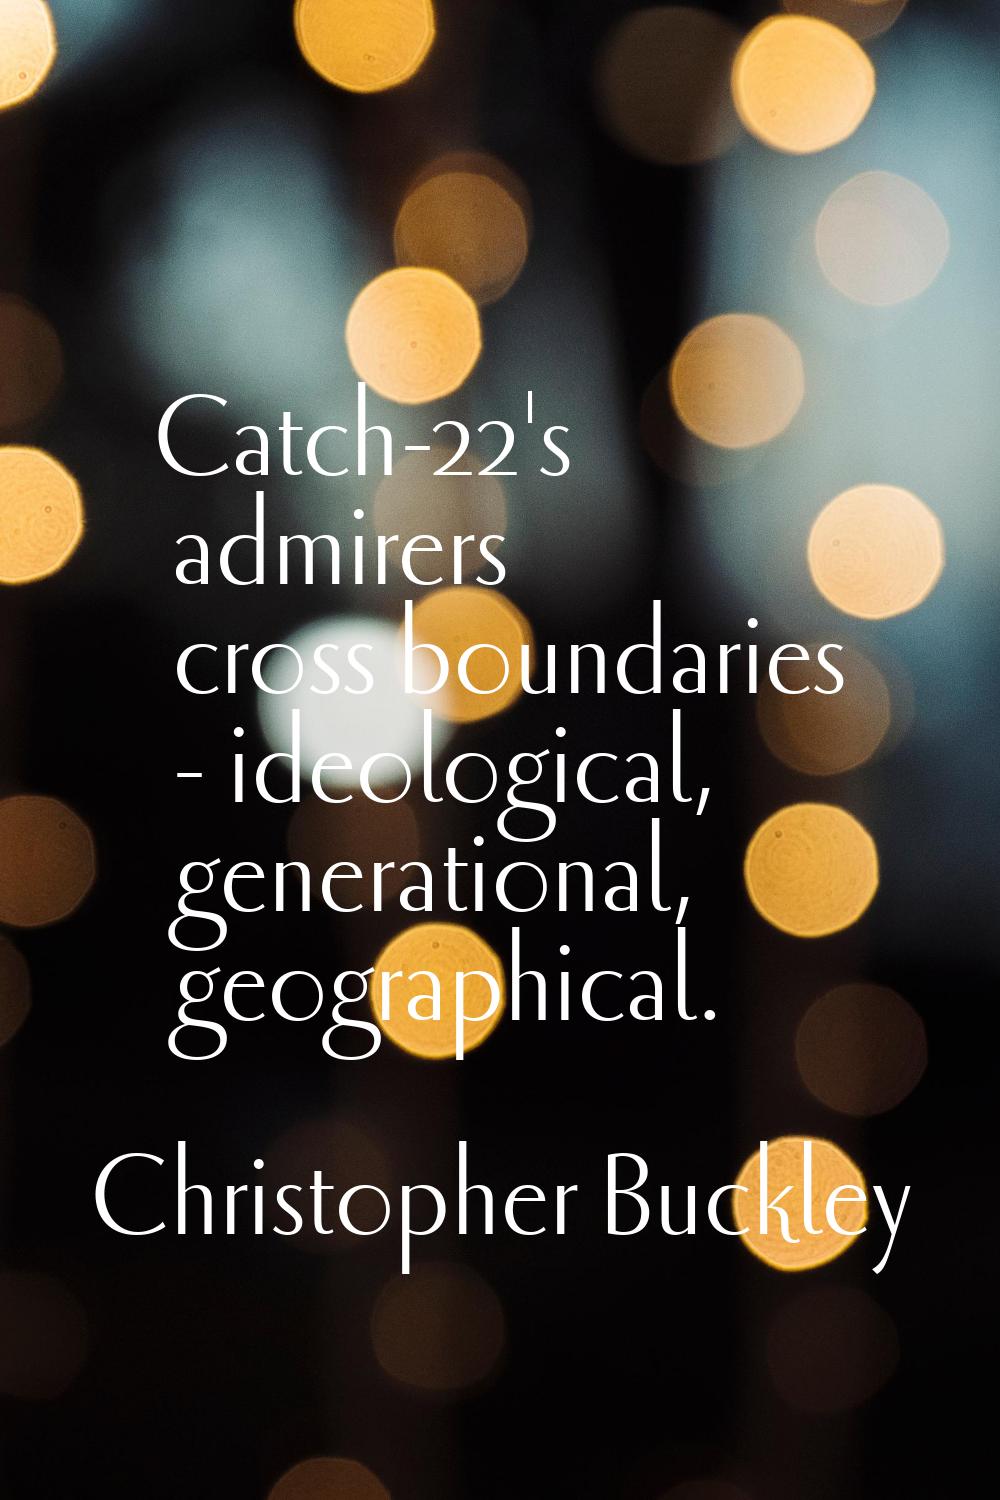 Catch-22's admirers cross boundaries - ideological, generational, geographical.